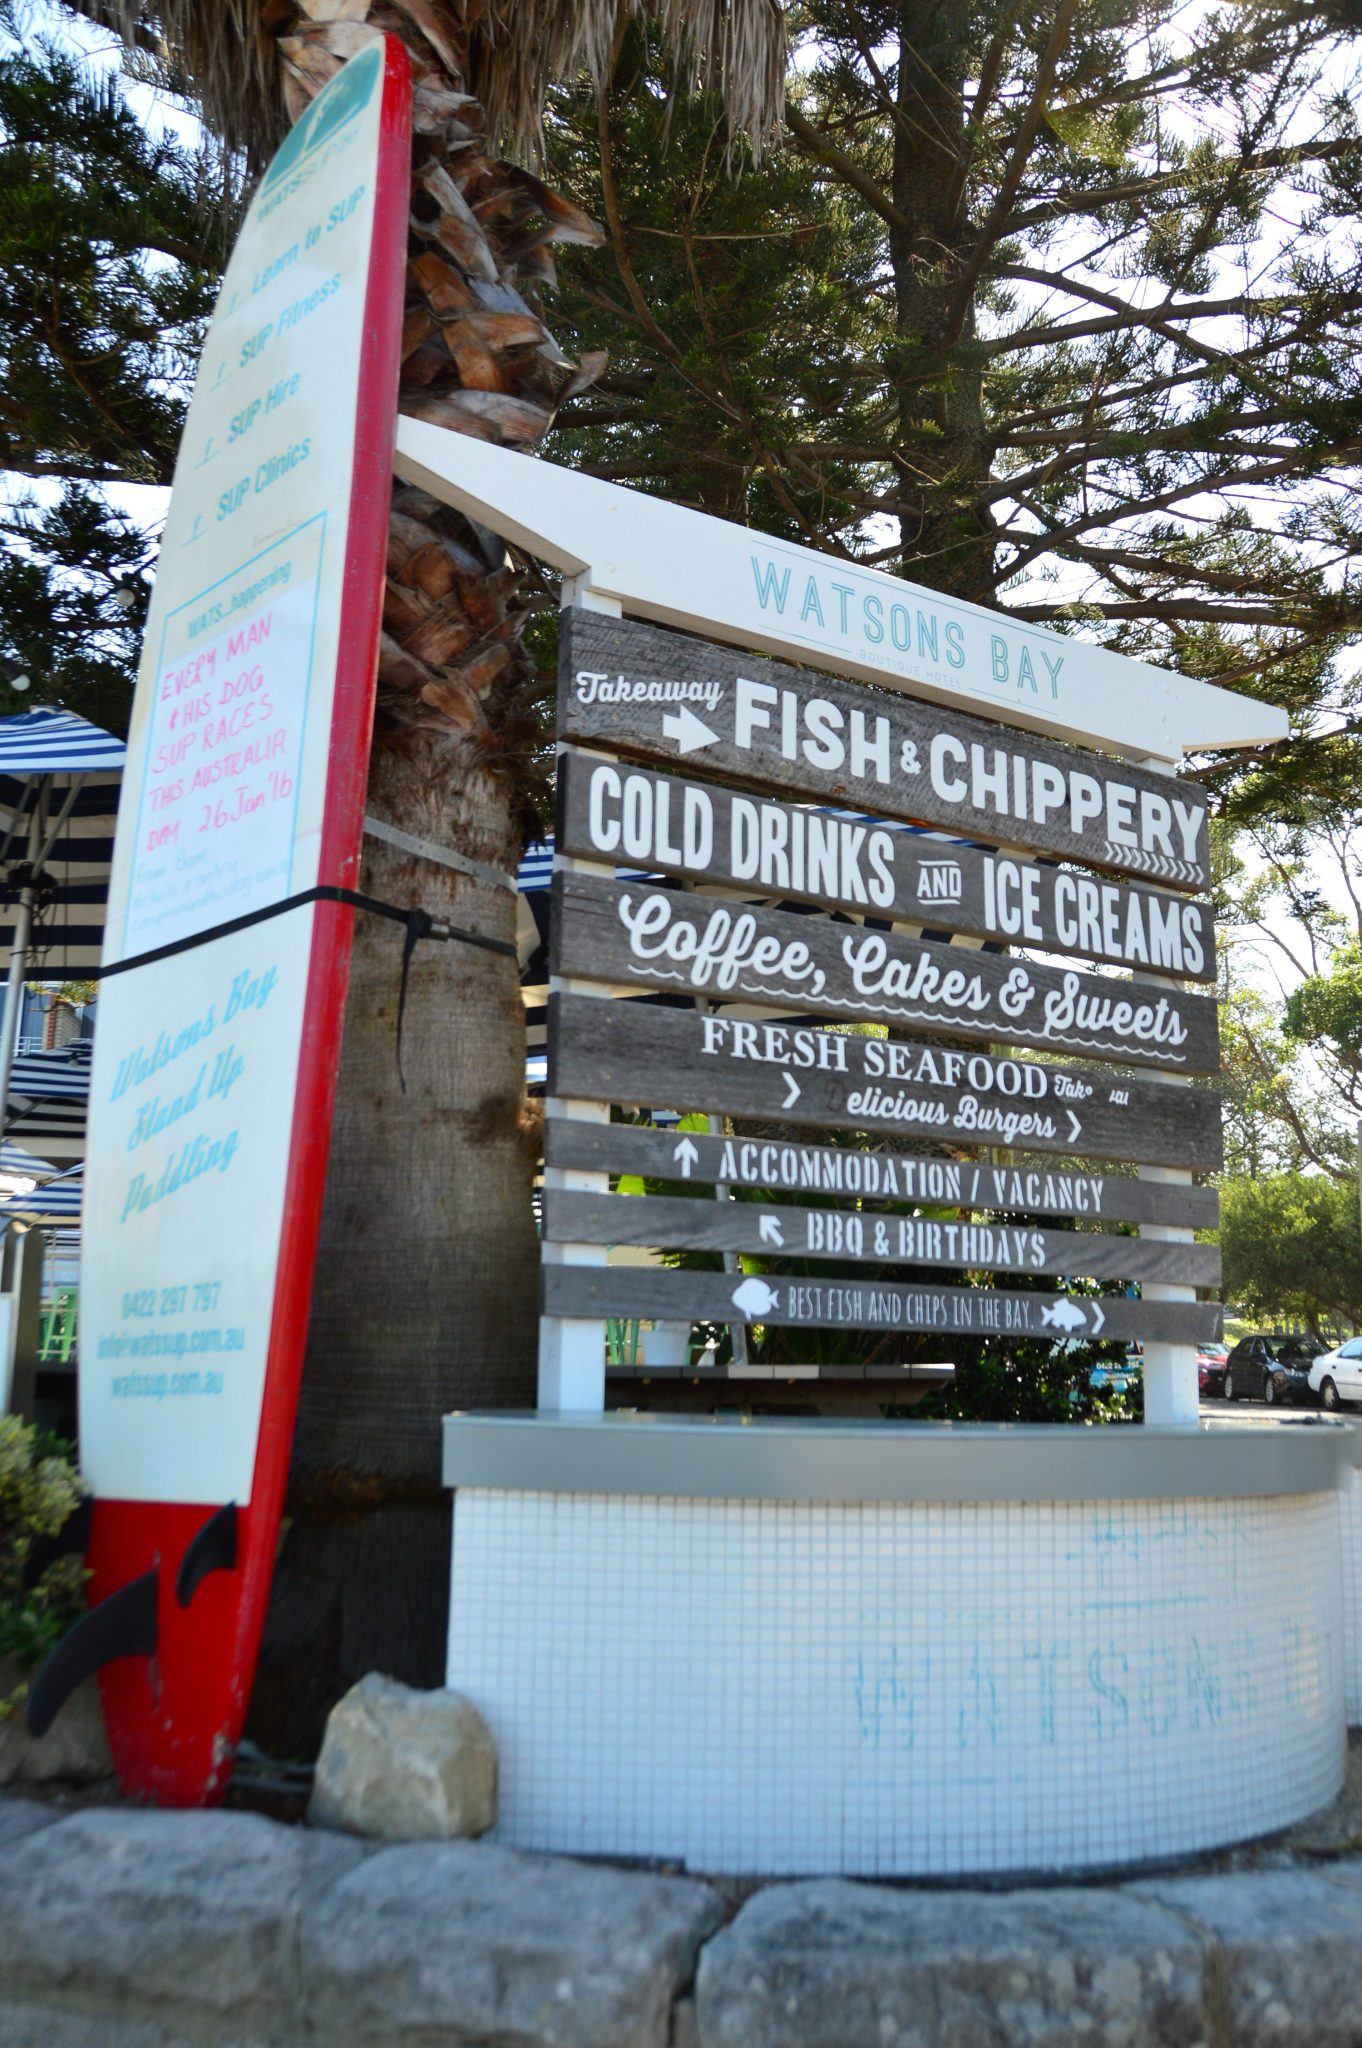 multiple signs with food and drinks at watsons bay sydney